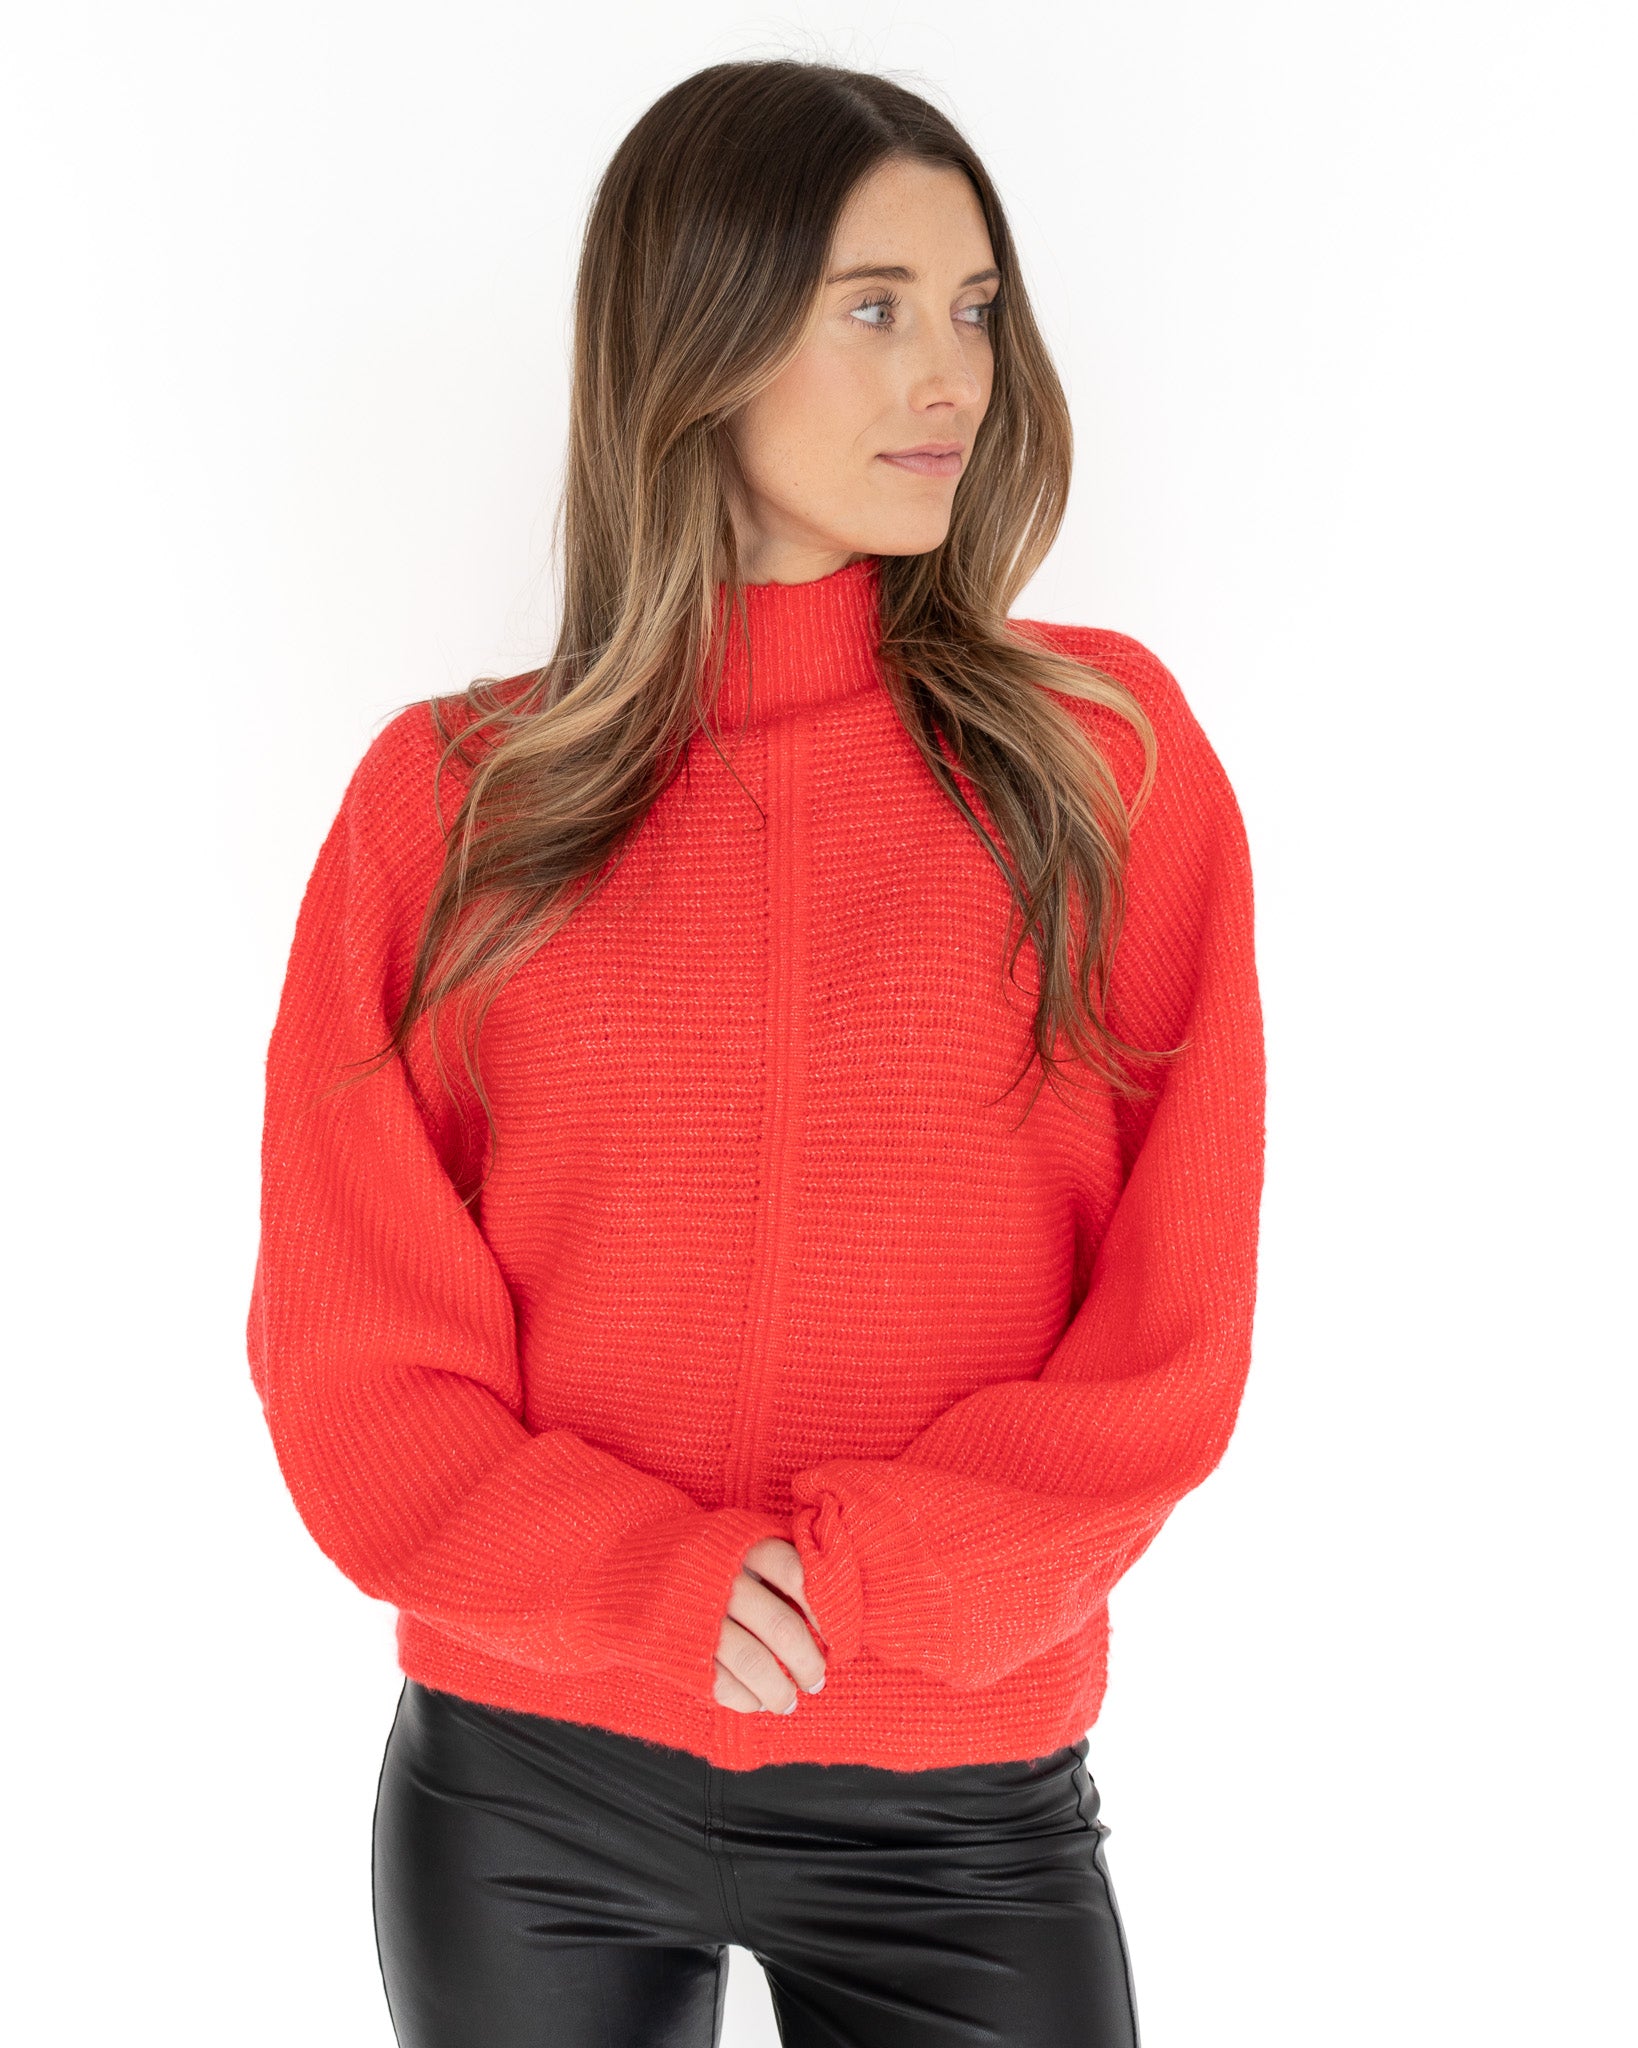 Cherry Red Knit Sweater